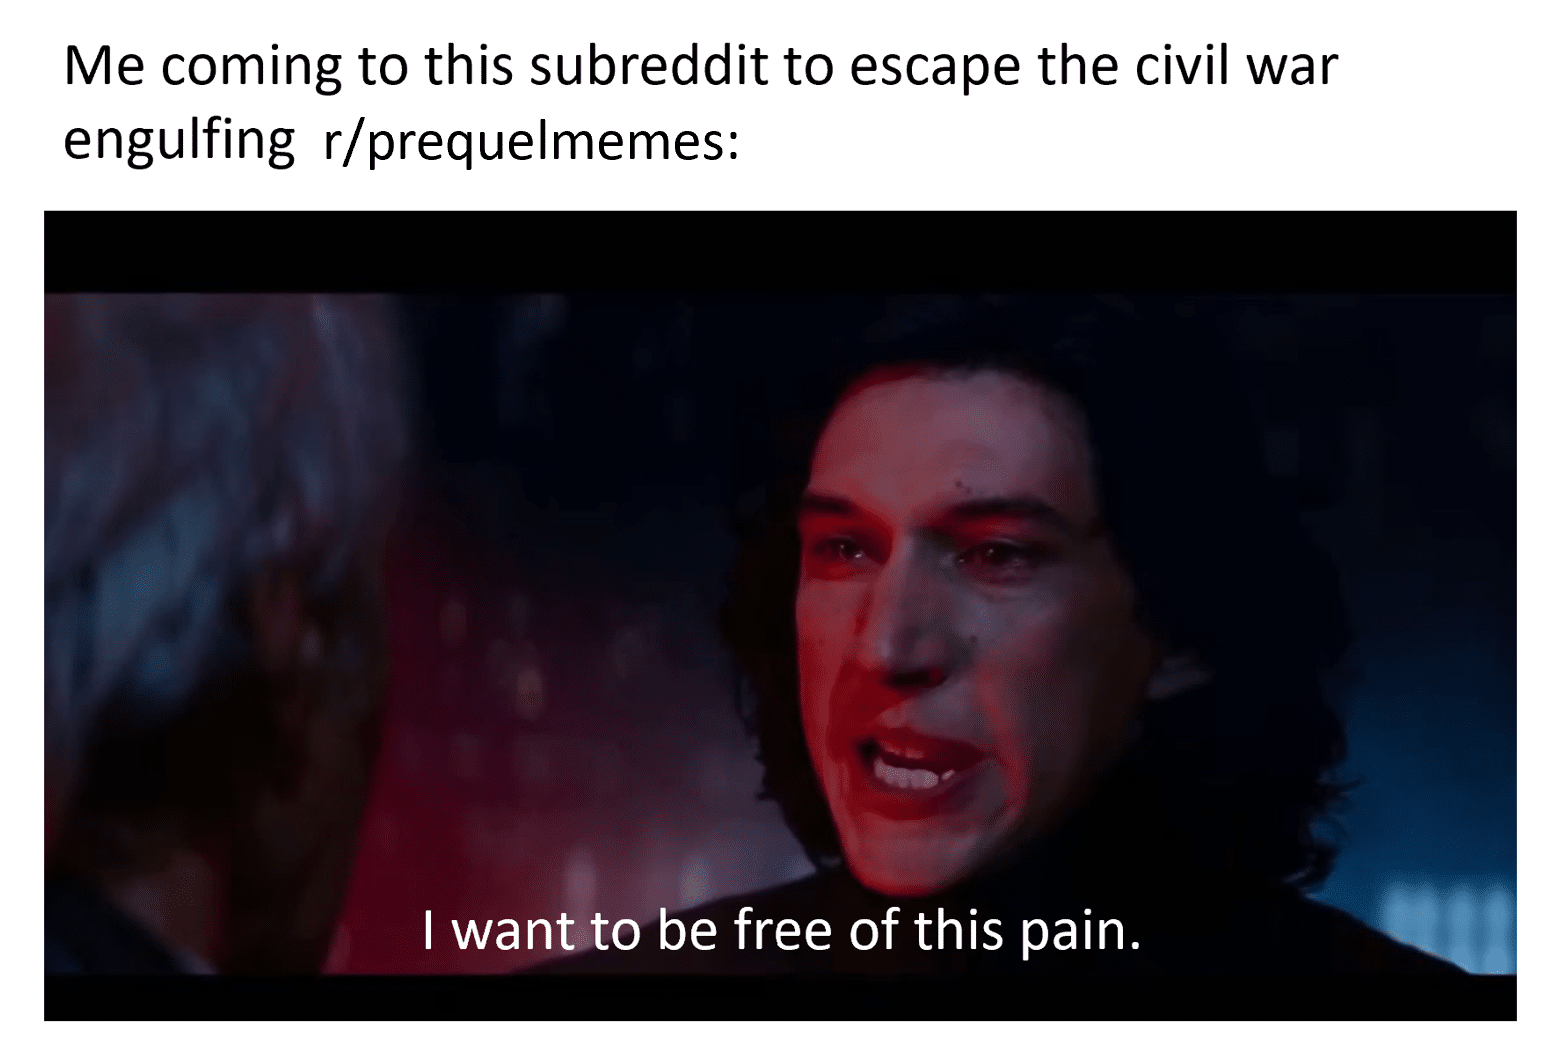 Sequel-memes, Thibson3, Star Wars, PrequelMemes, Jedi, Thibson Star Wars Memes Sequel-memes, Thibson3, Star Wars, PrequelMemes, Jedi, Thibson text: Me coming to this subreddit to escape the civil war engulfing r/prequelmemes: I wantto be free of this pain. 